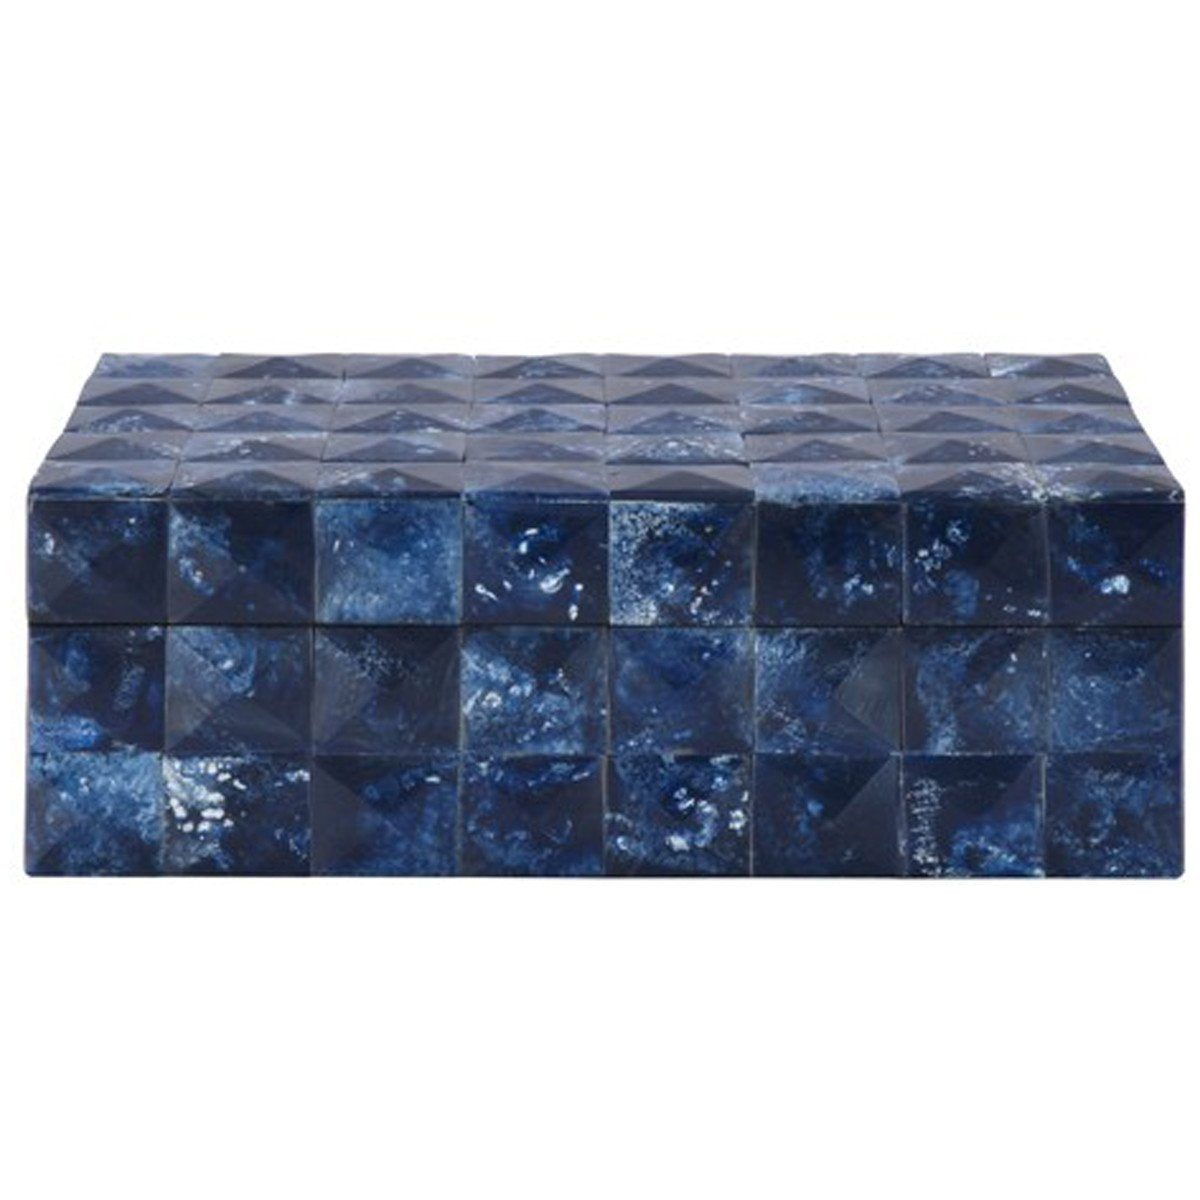 Worlds Away Hand Crafted Decorative Box in A Blue Geometric Pattern